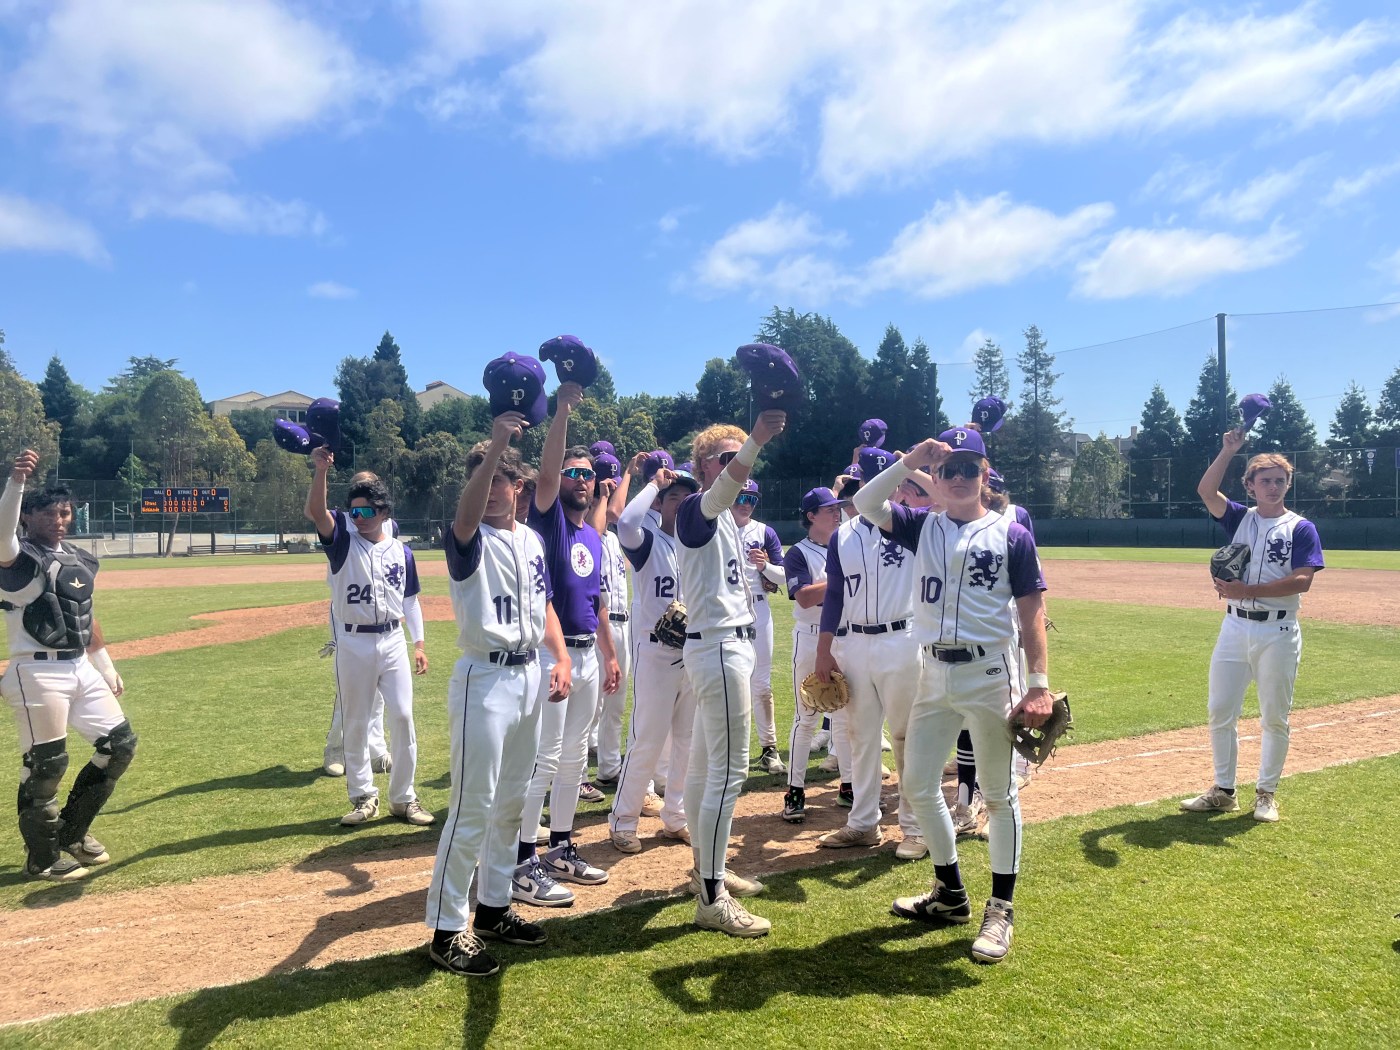 piedmont-rejuvenated-coming-off-bye,-shuts-out-hercules-to-advance-to-ncs-division-iv-semifinals